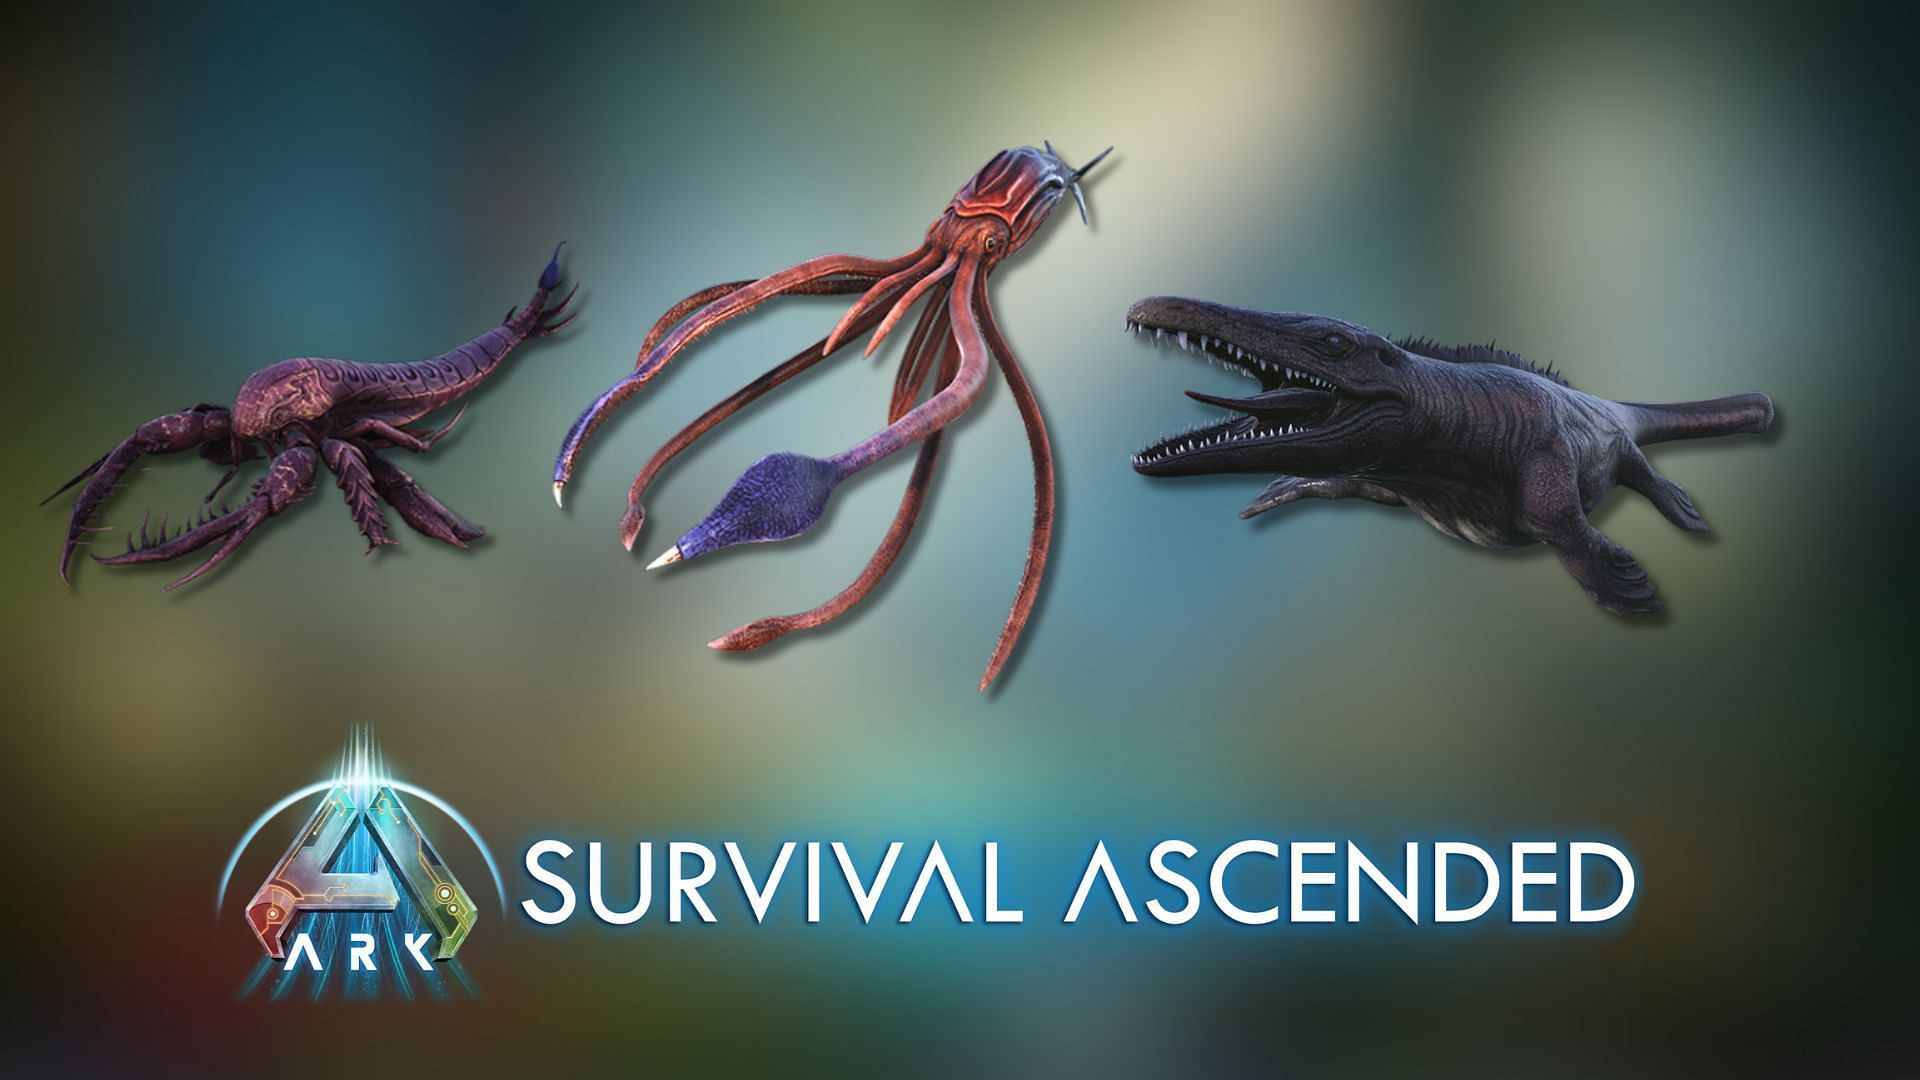 all locations to farm Black Pearls in Ark Survival Ascended